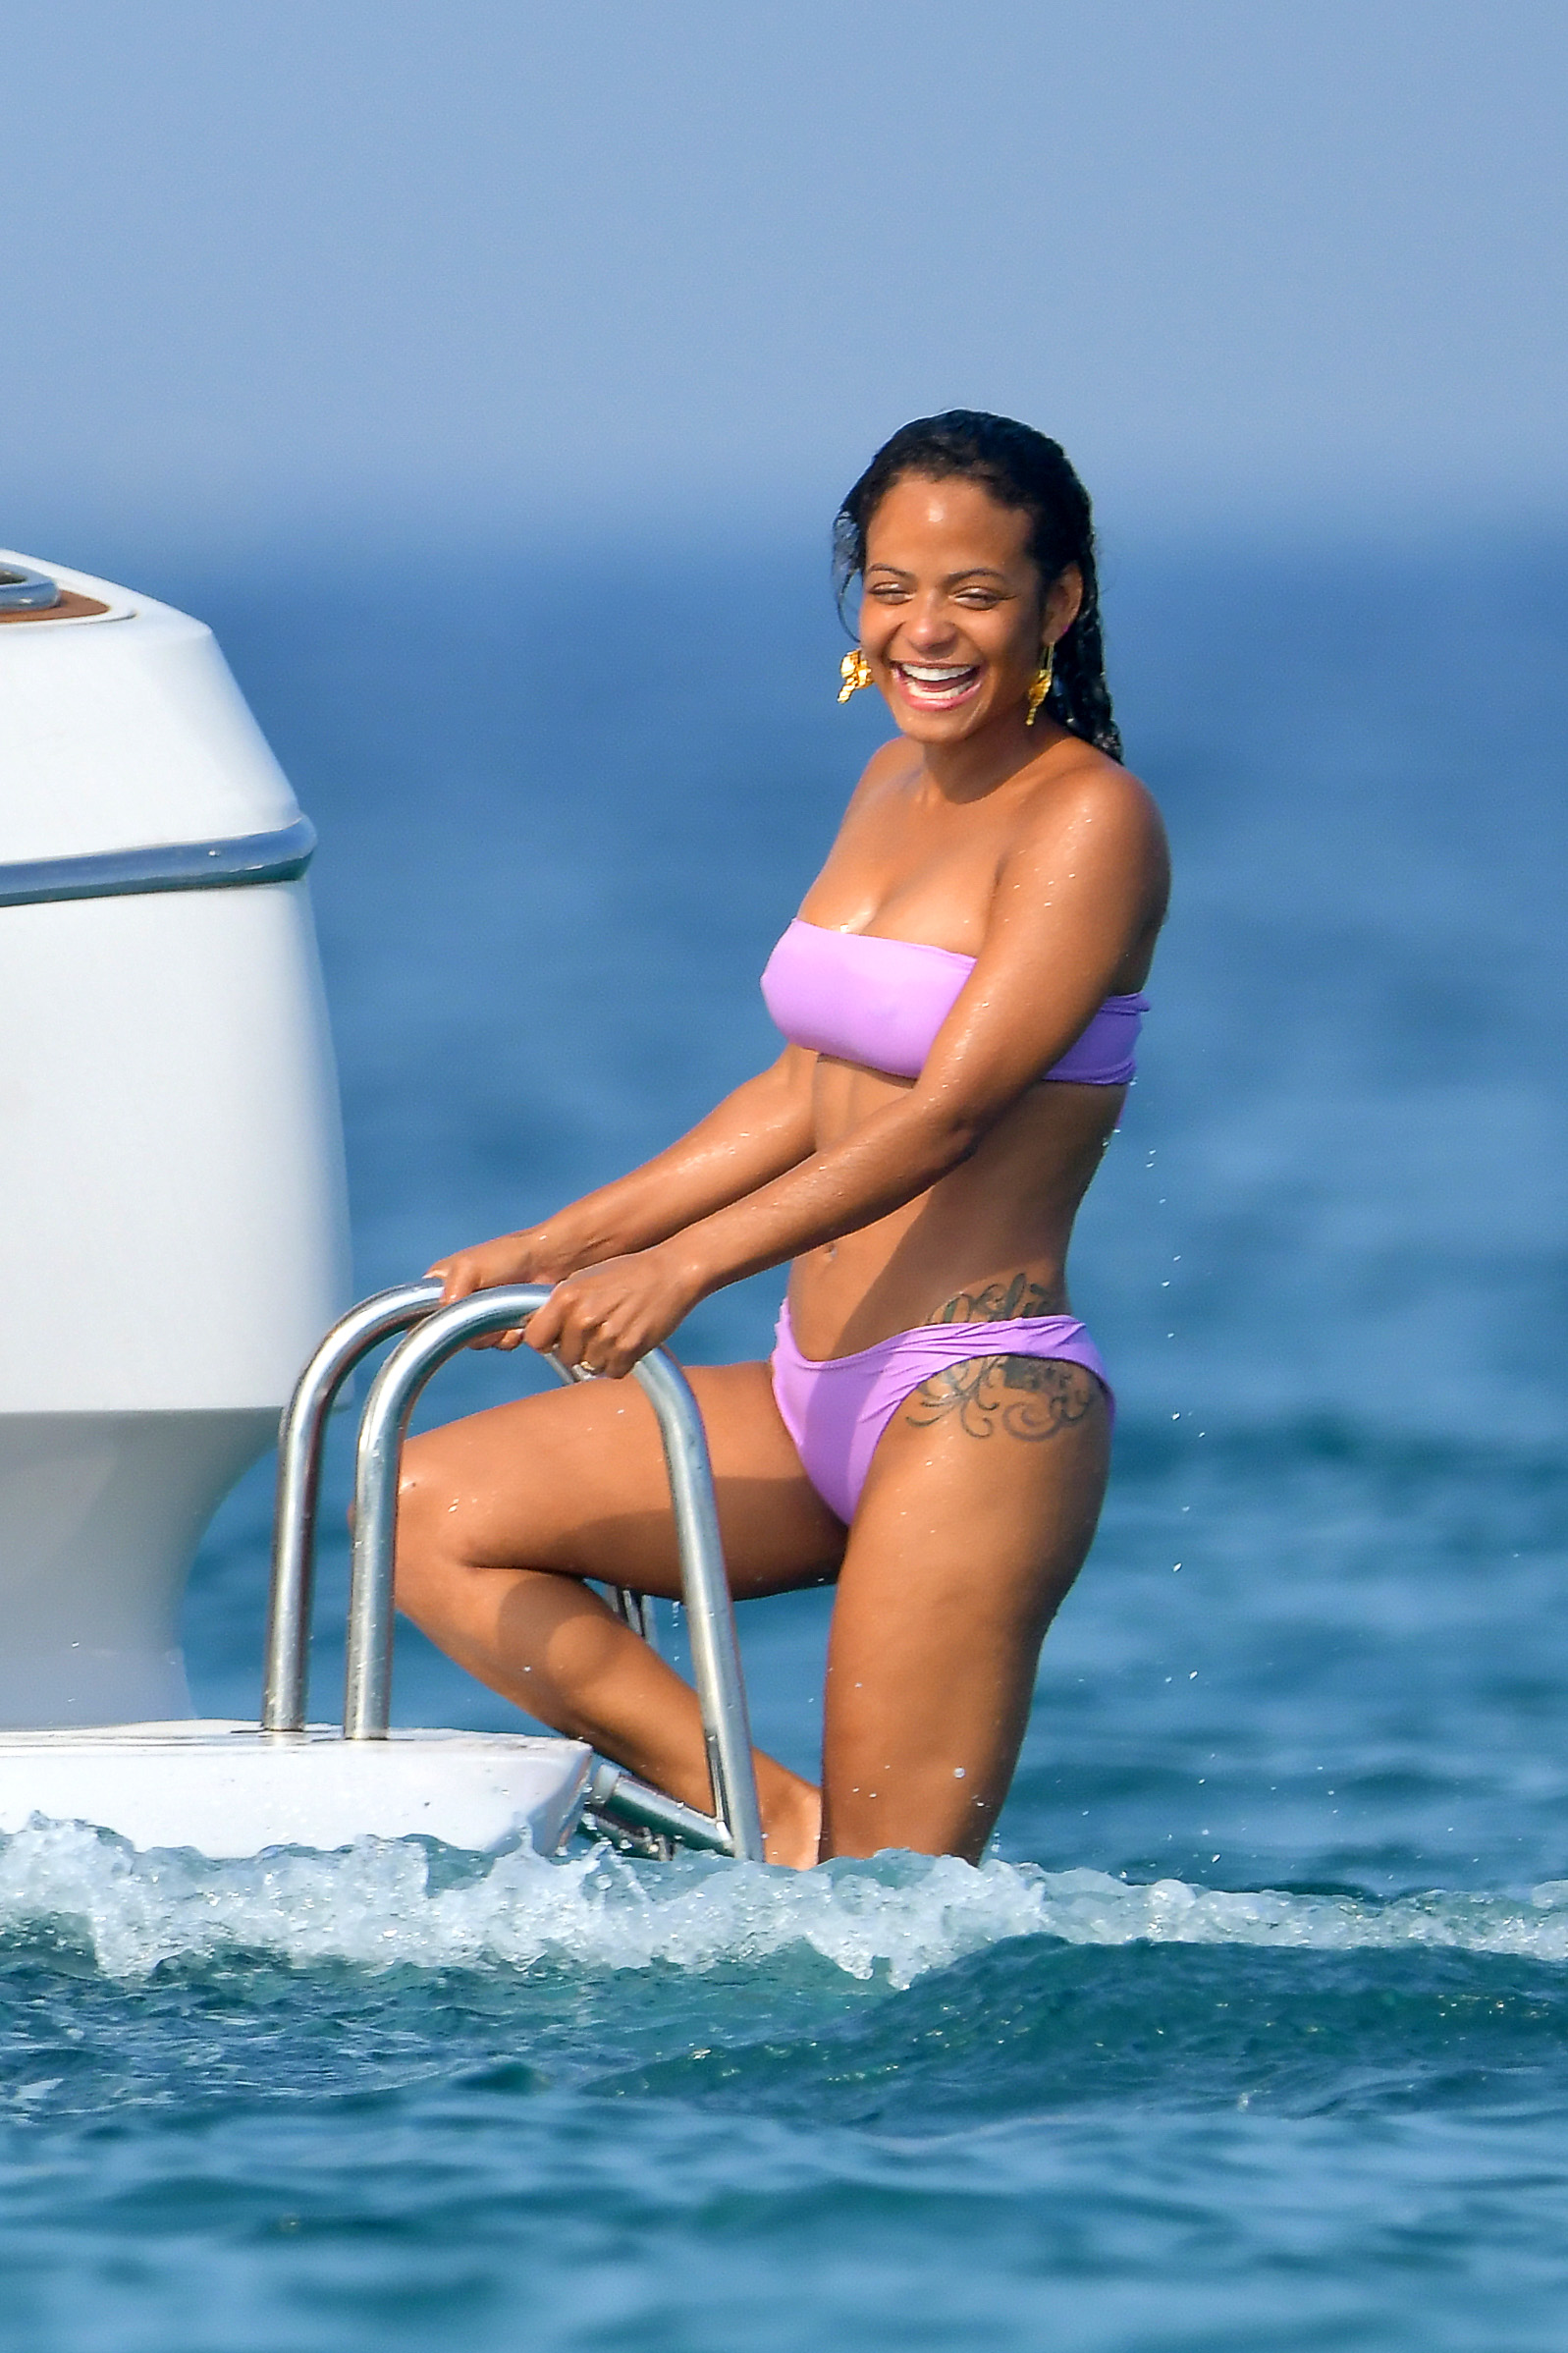 Christina Milian pokies and cameltoe in sexy bikini candids on a boat during holiday UHQ (37).jpg